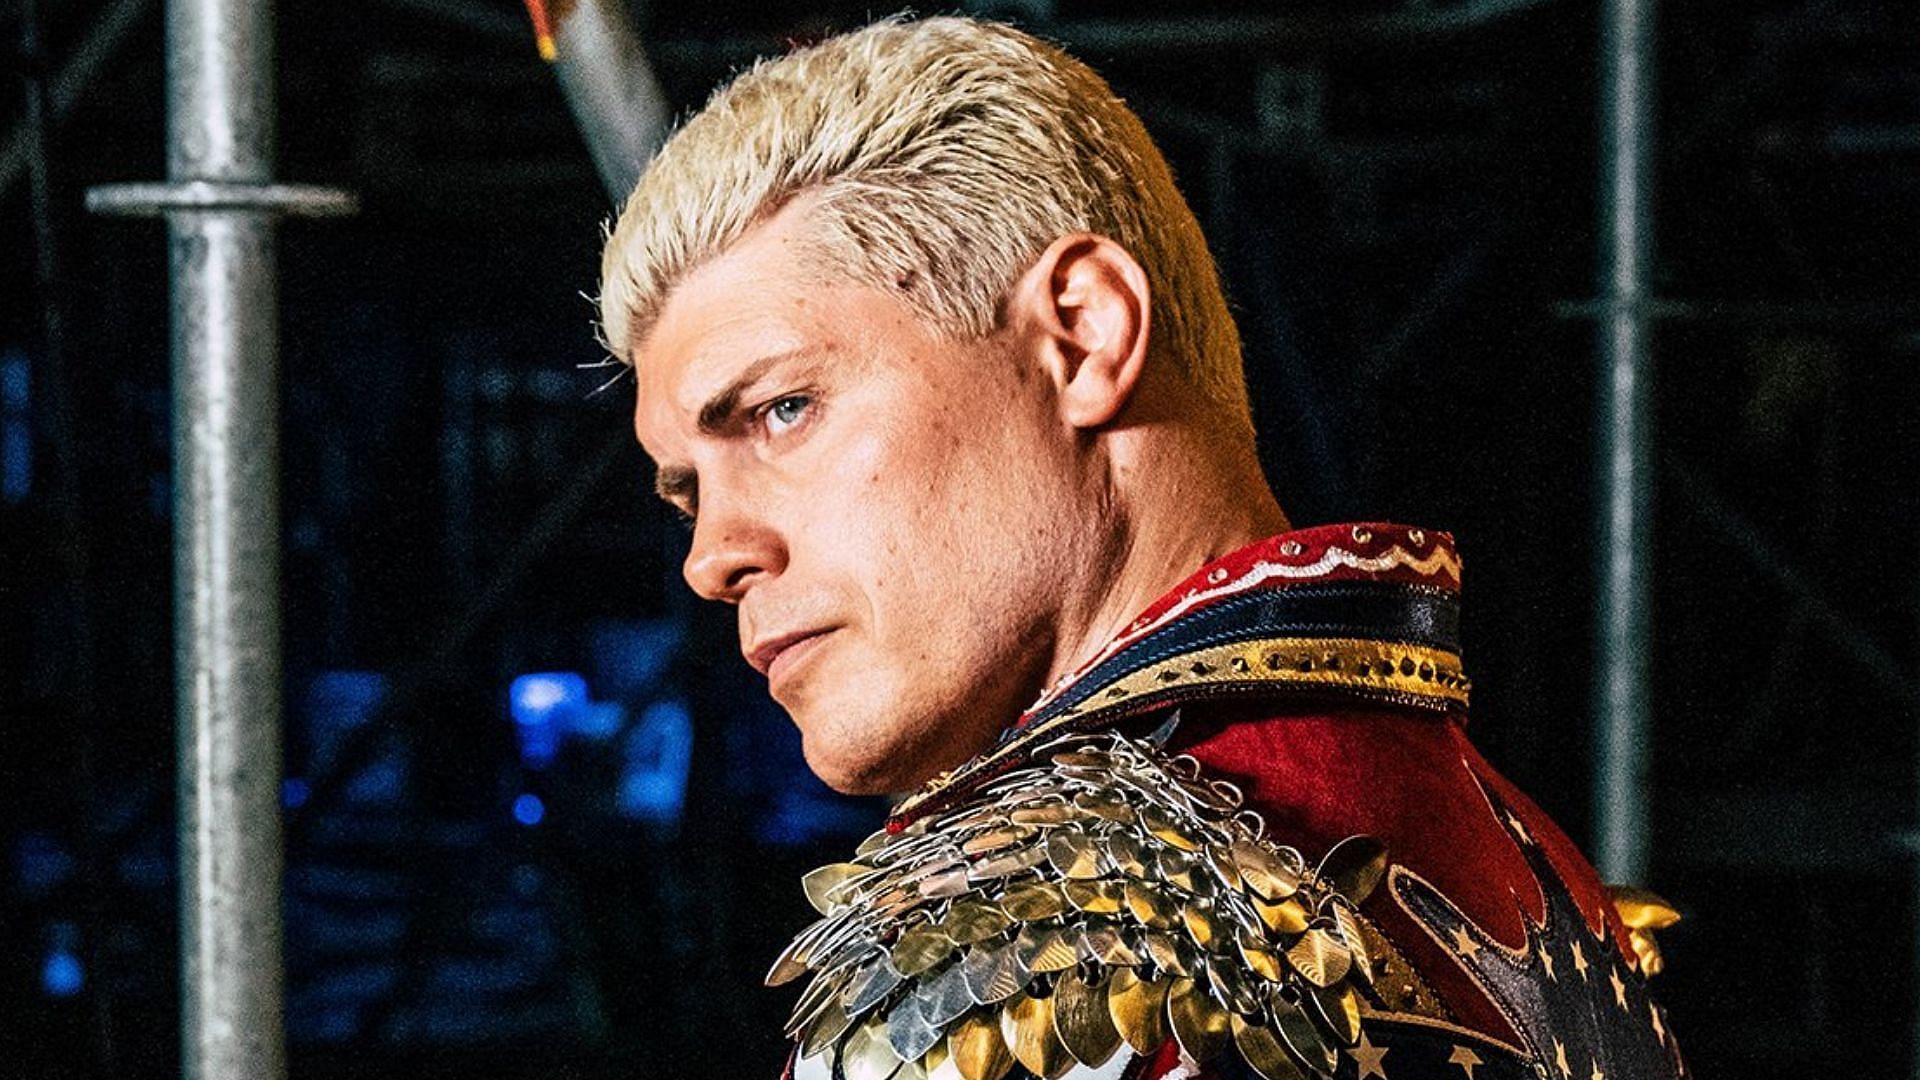 Cody Rhodes is currently sidelined due to injury